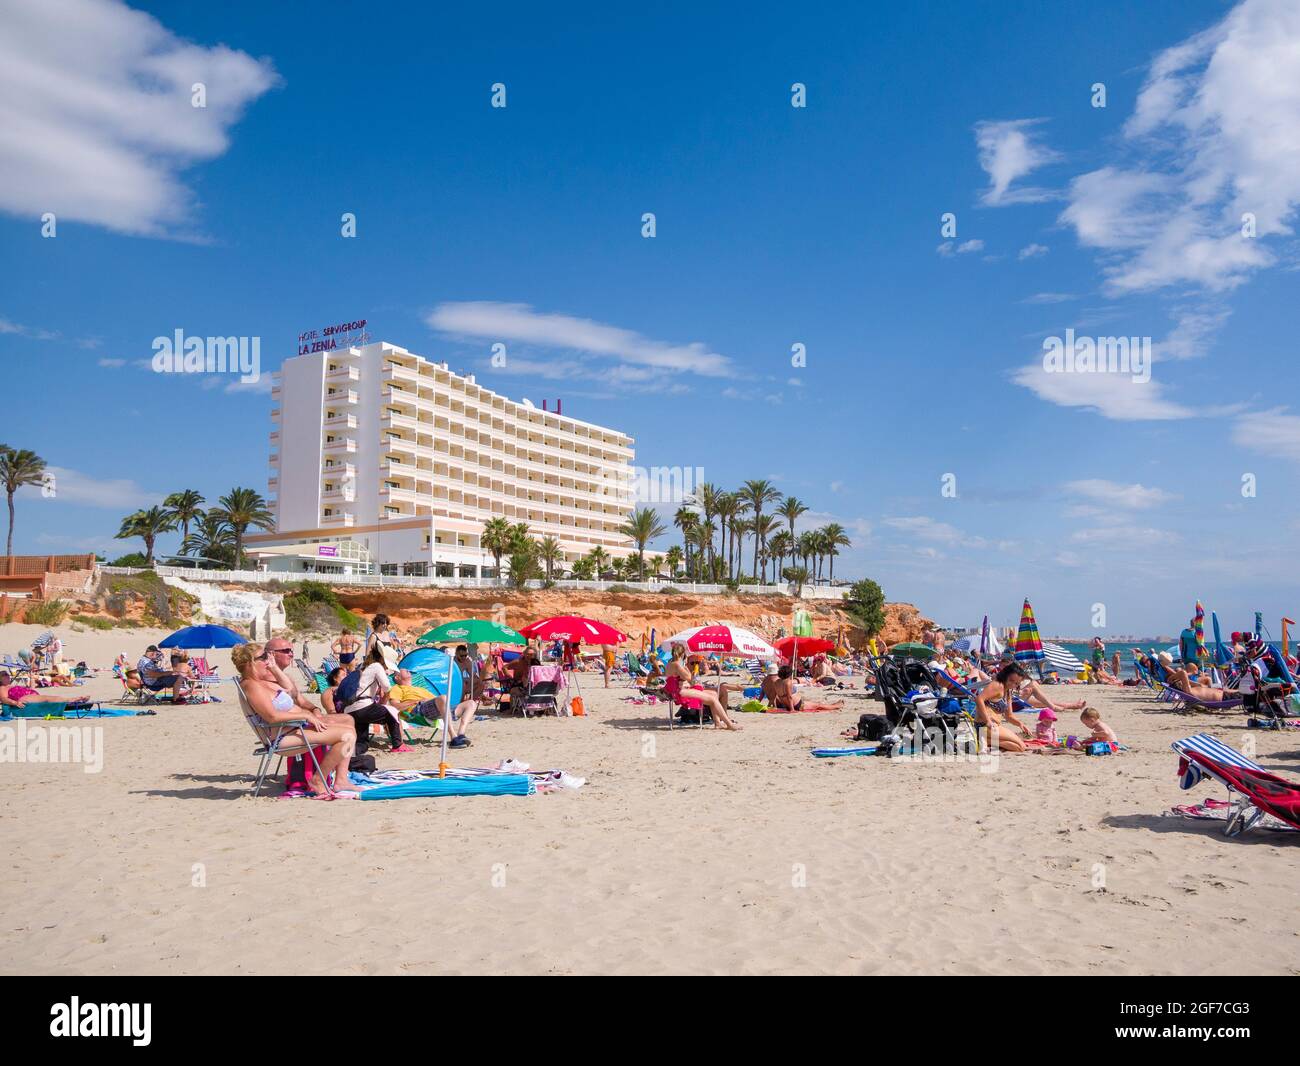 Holidaymakers on La Zenia beach on the Costa Blanca coast of Spain on the Mediterranean near Torrevieja. Stock Photo